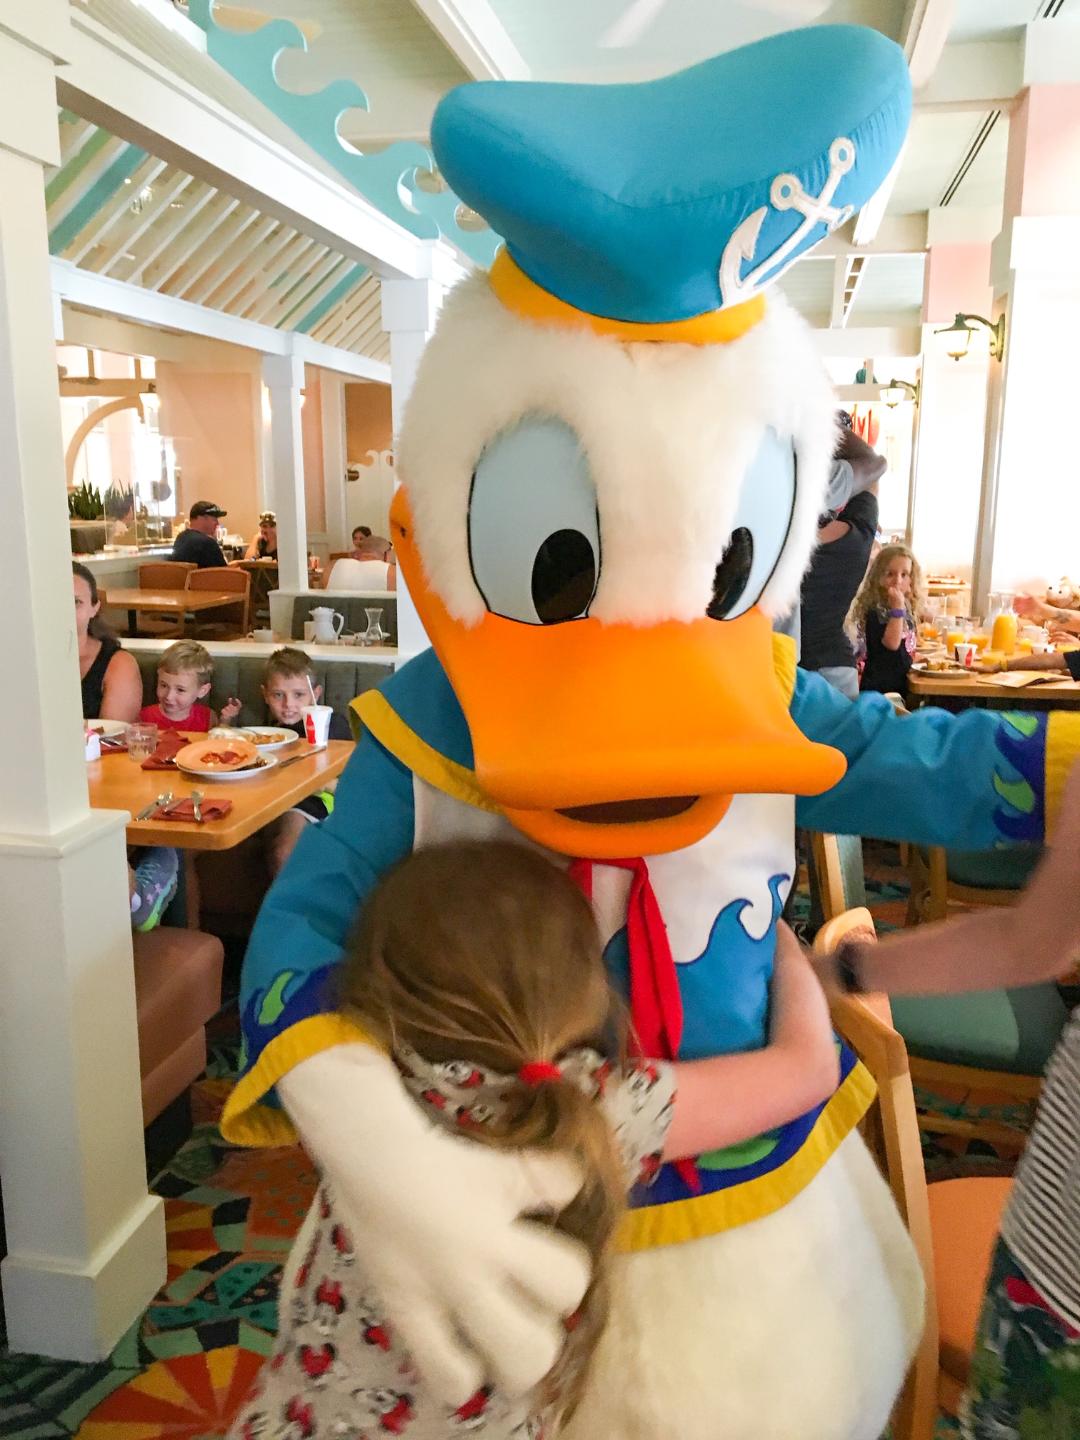 Meeting with Donald at Cape May. one of the Disney Character Breakfast meal options